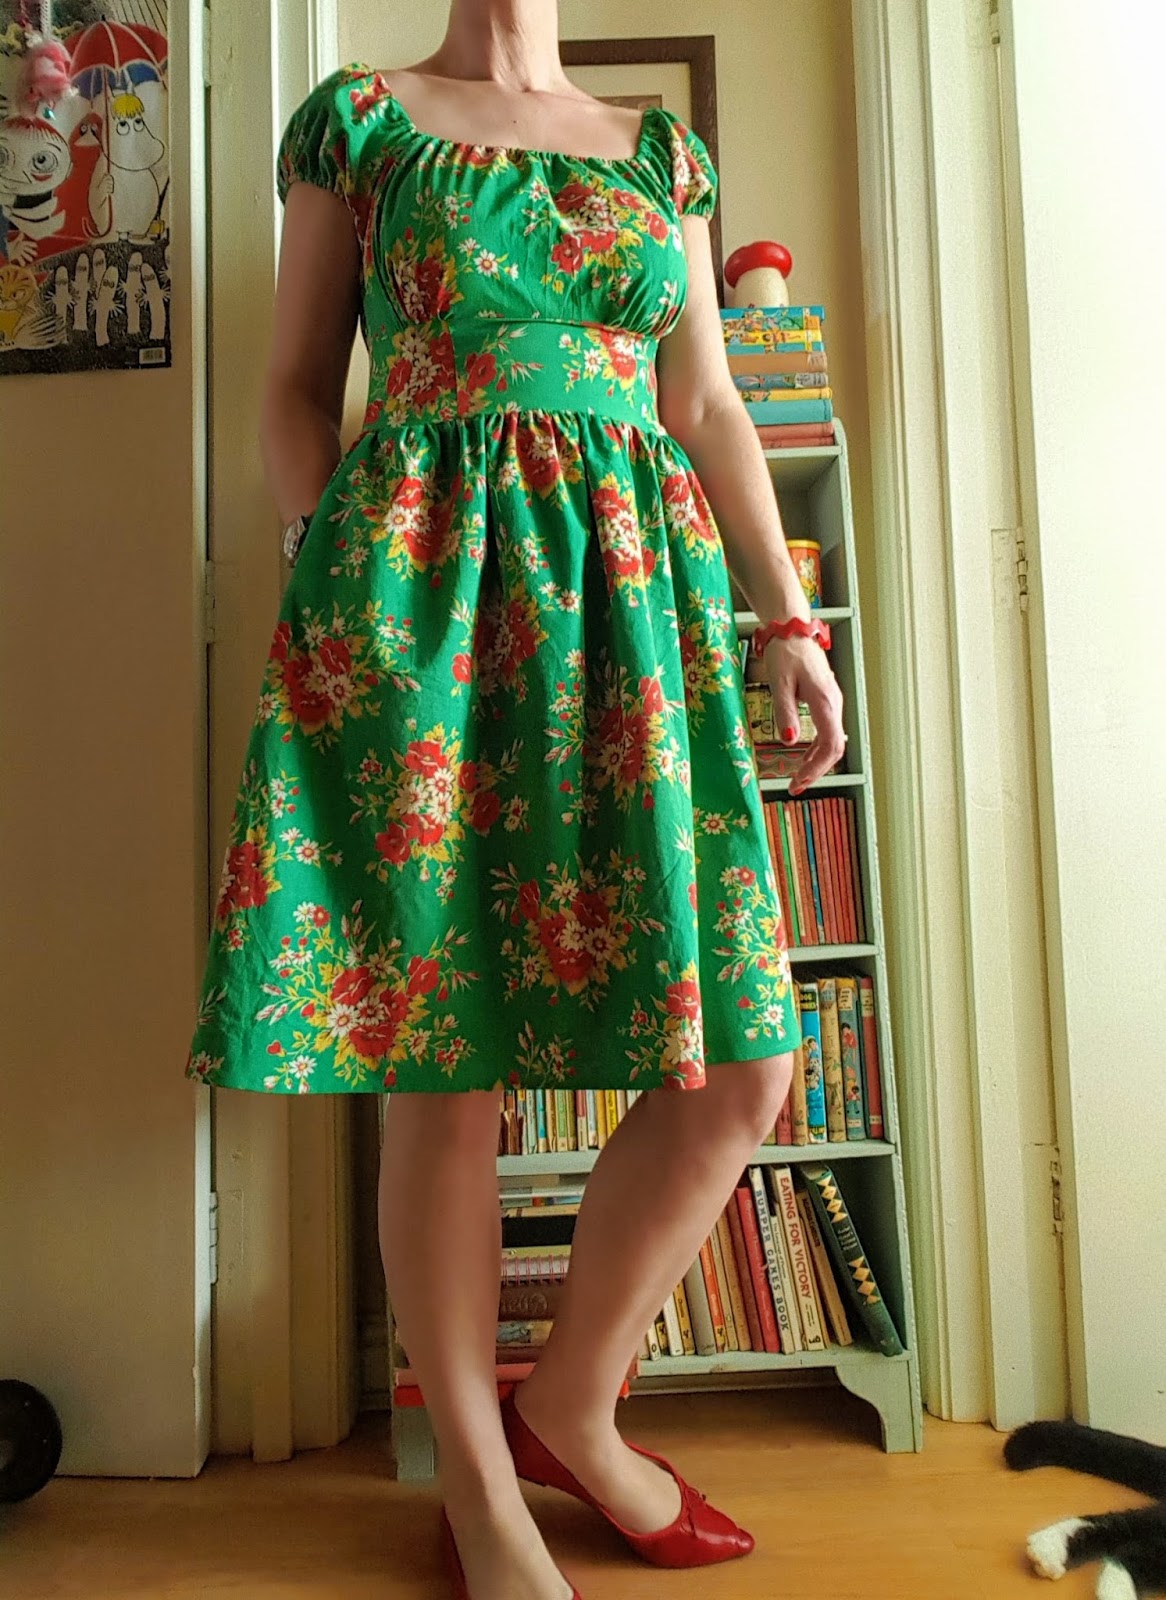 Bobo Bun: Sewing and Pattern Hacking with Vintage cloth